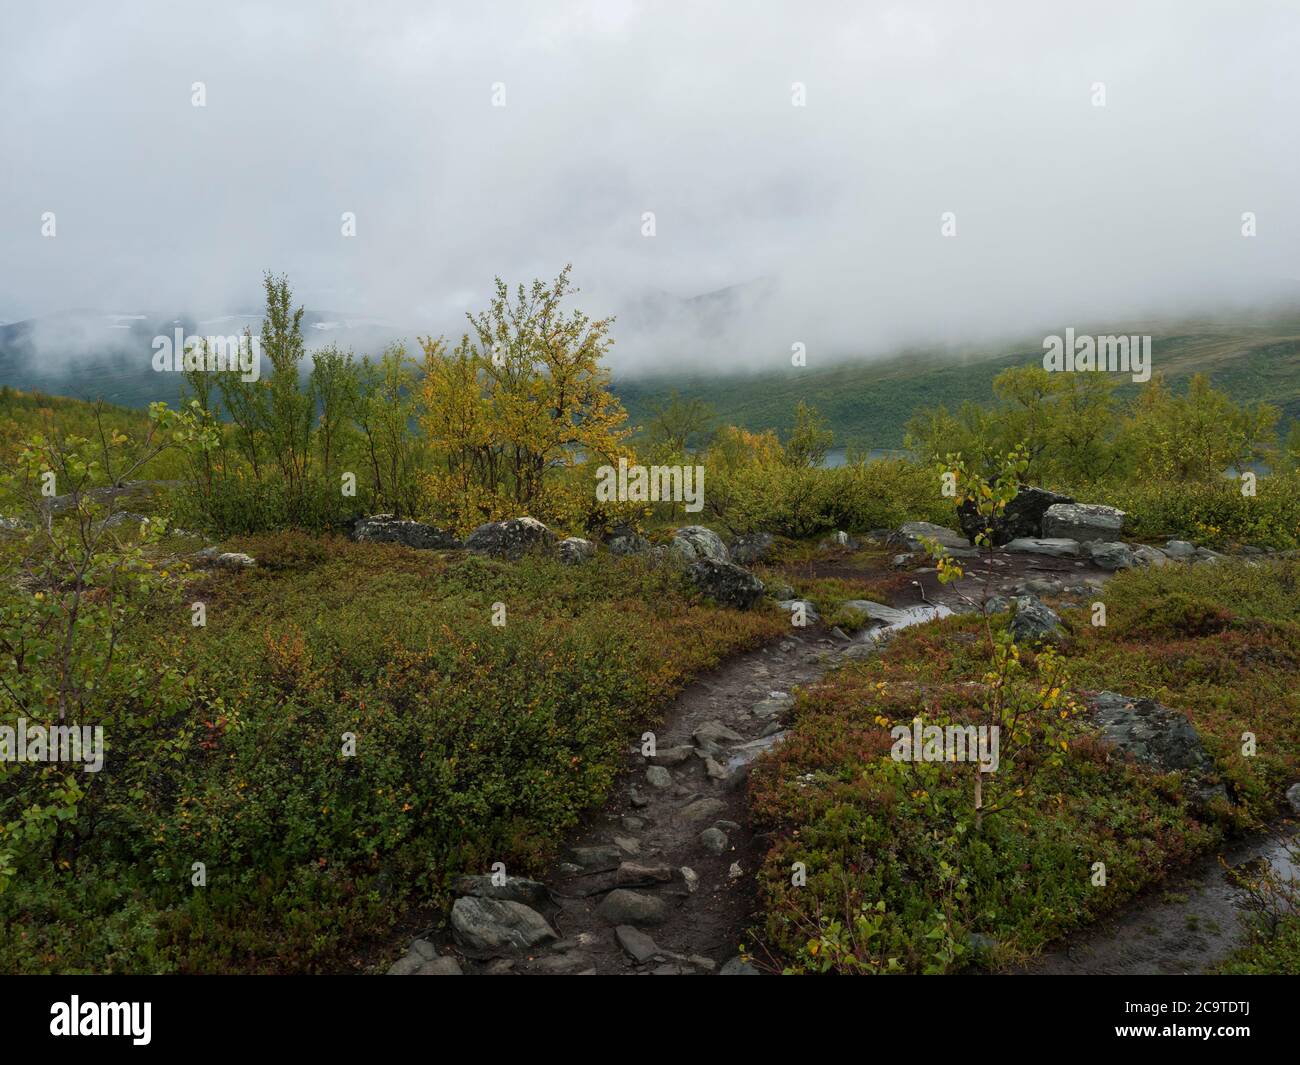 Lapland nature at Kungsleden hiking trail with green mountains, Teusajaure lake, rock boulders, autumn colored bushes, birch tree and heath in mist an Stock Photo